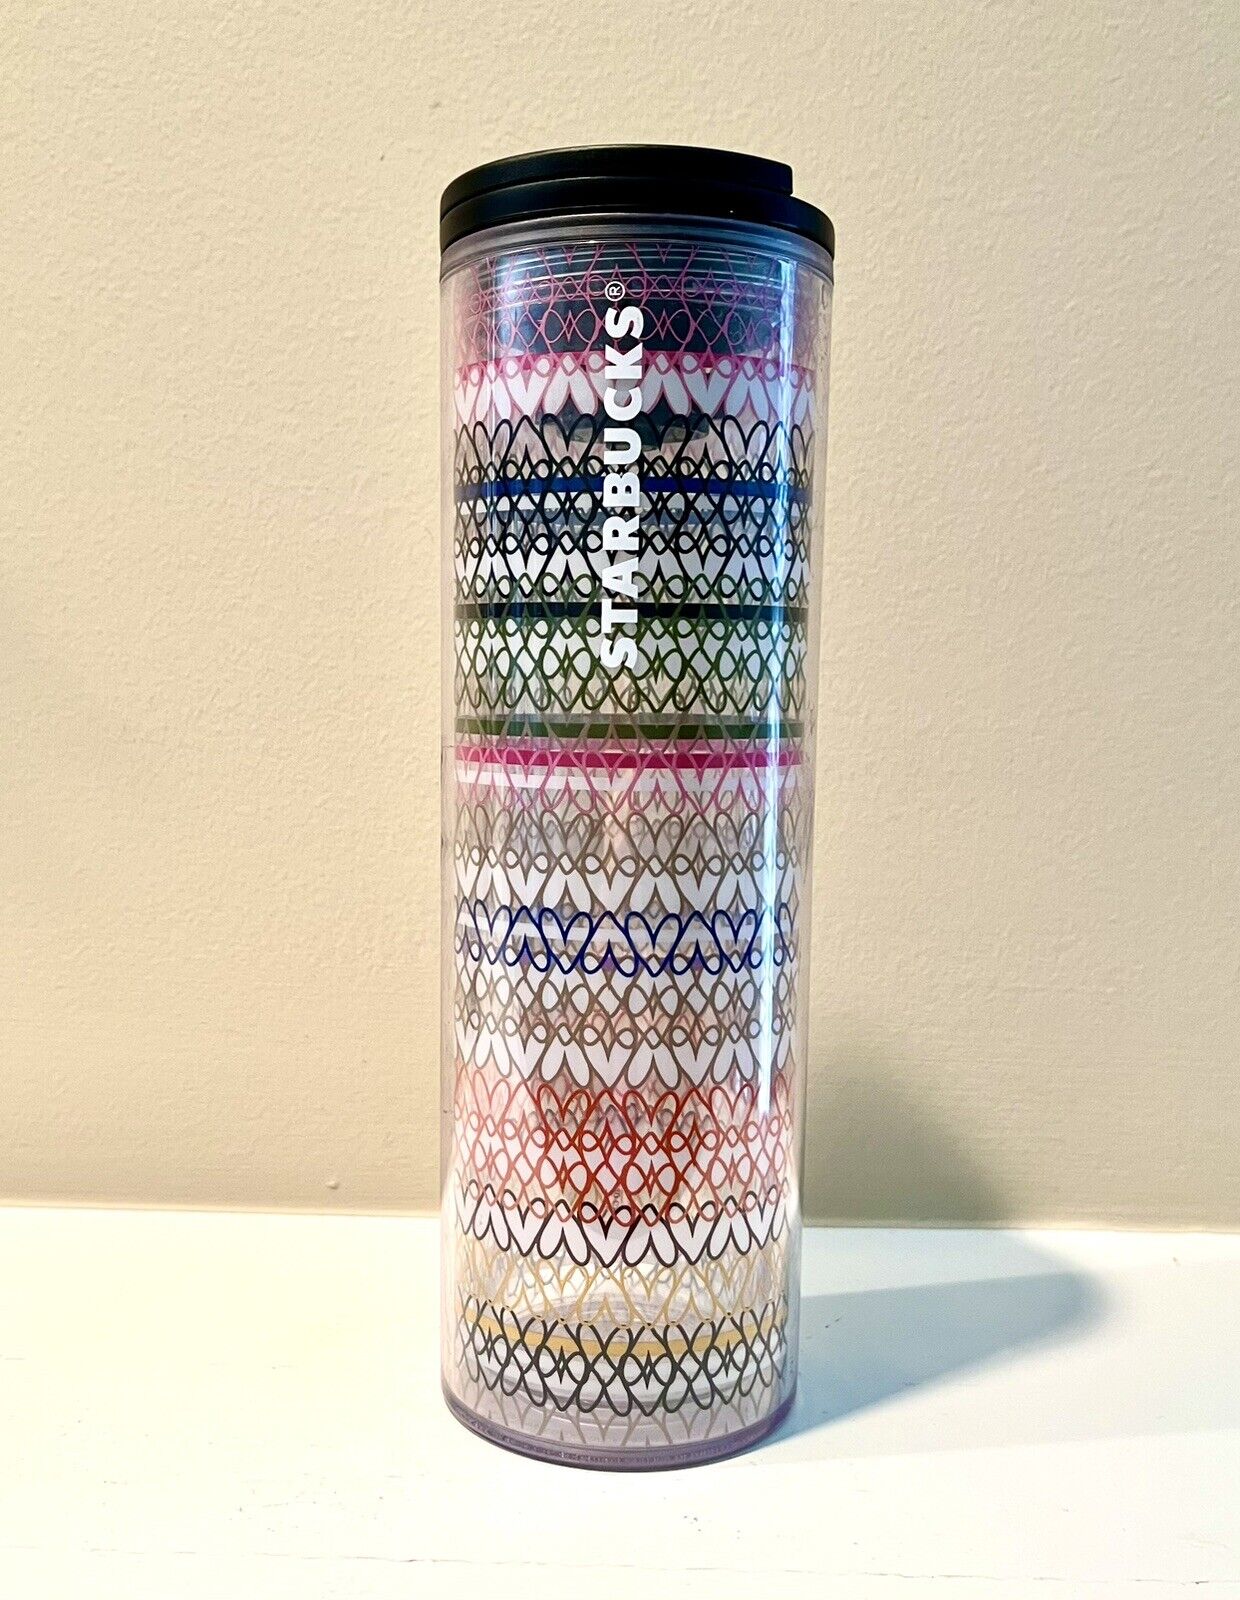 NWT STARBUCKS 2017 Outline Hearts Cold Cup Tumbler Coffee Tea 16oz Collectible